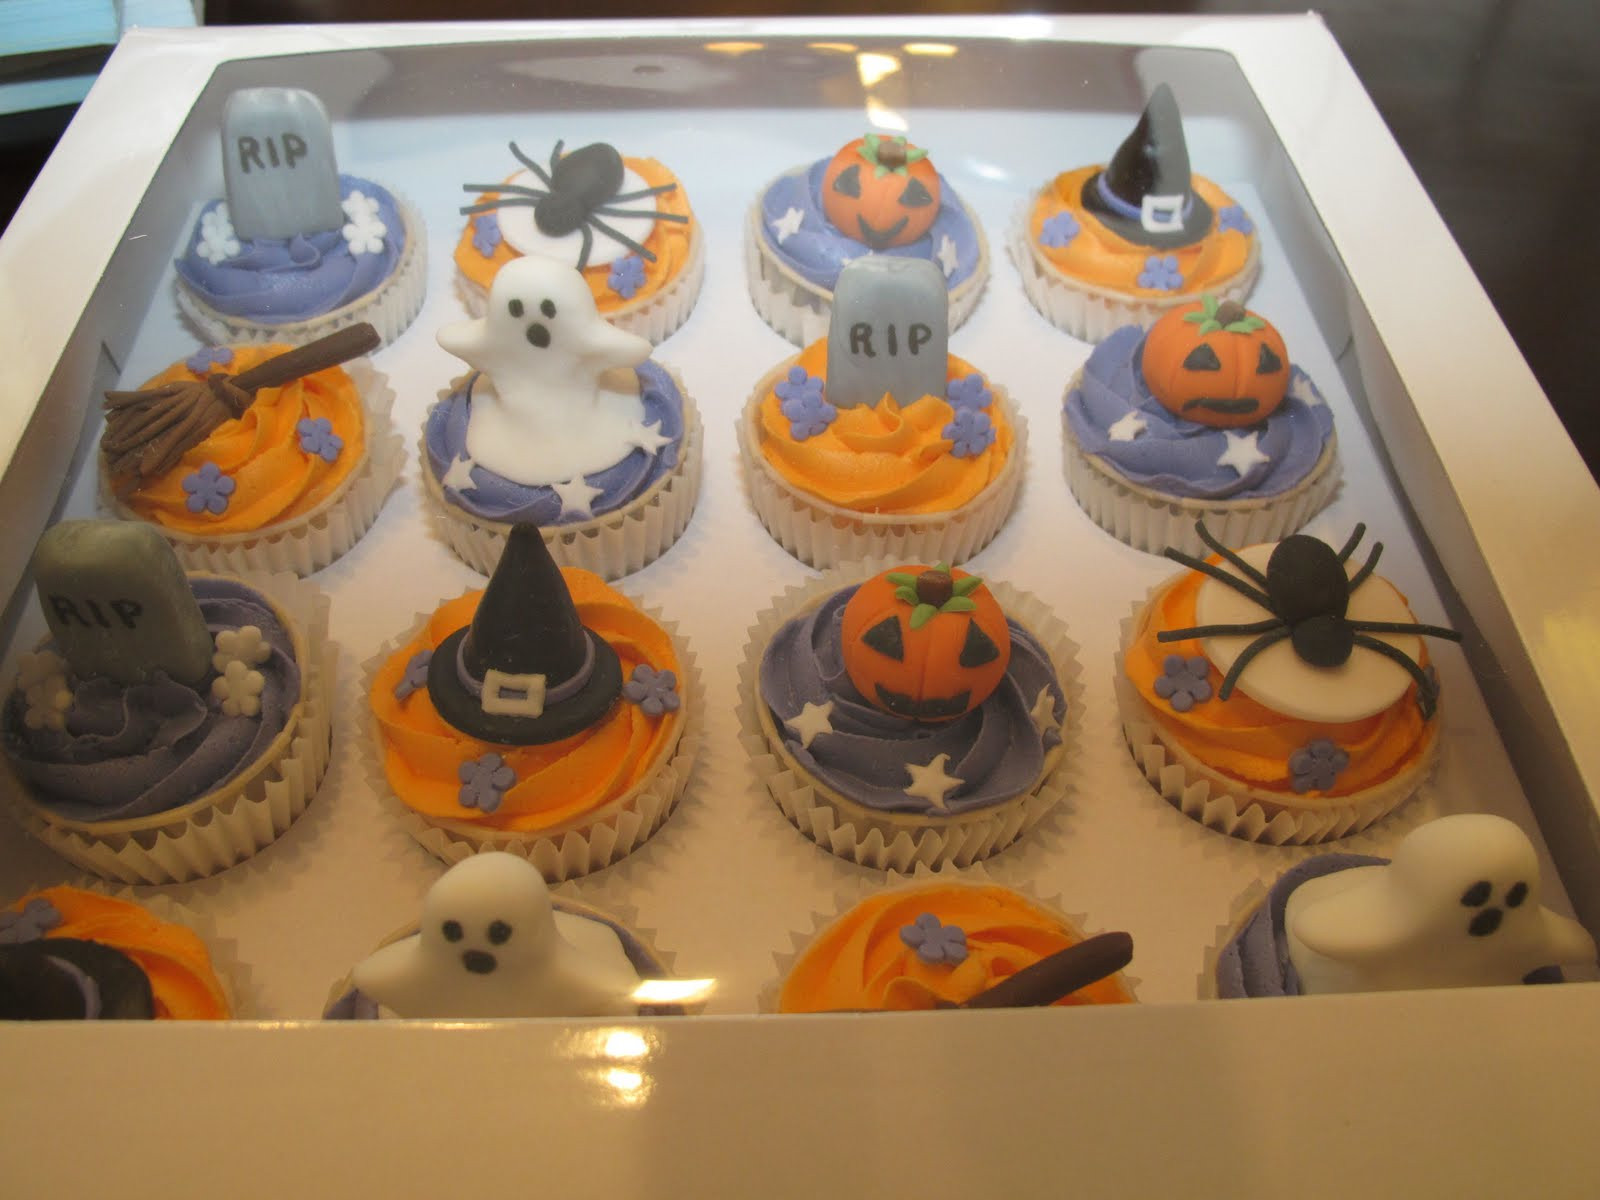 Halloween Cupcakes Decorating Ideas
 Pink Oven Cakes and Cookies Halloween cupcake ideas